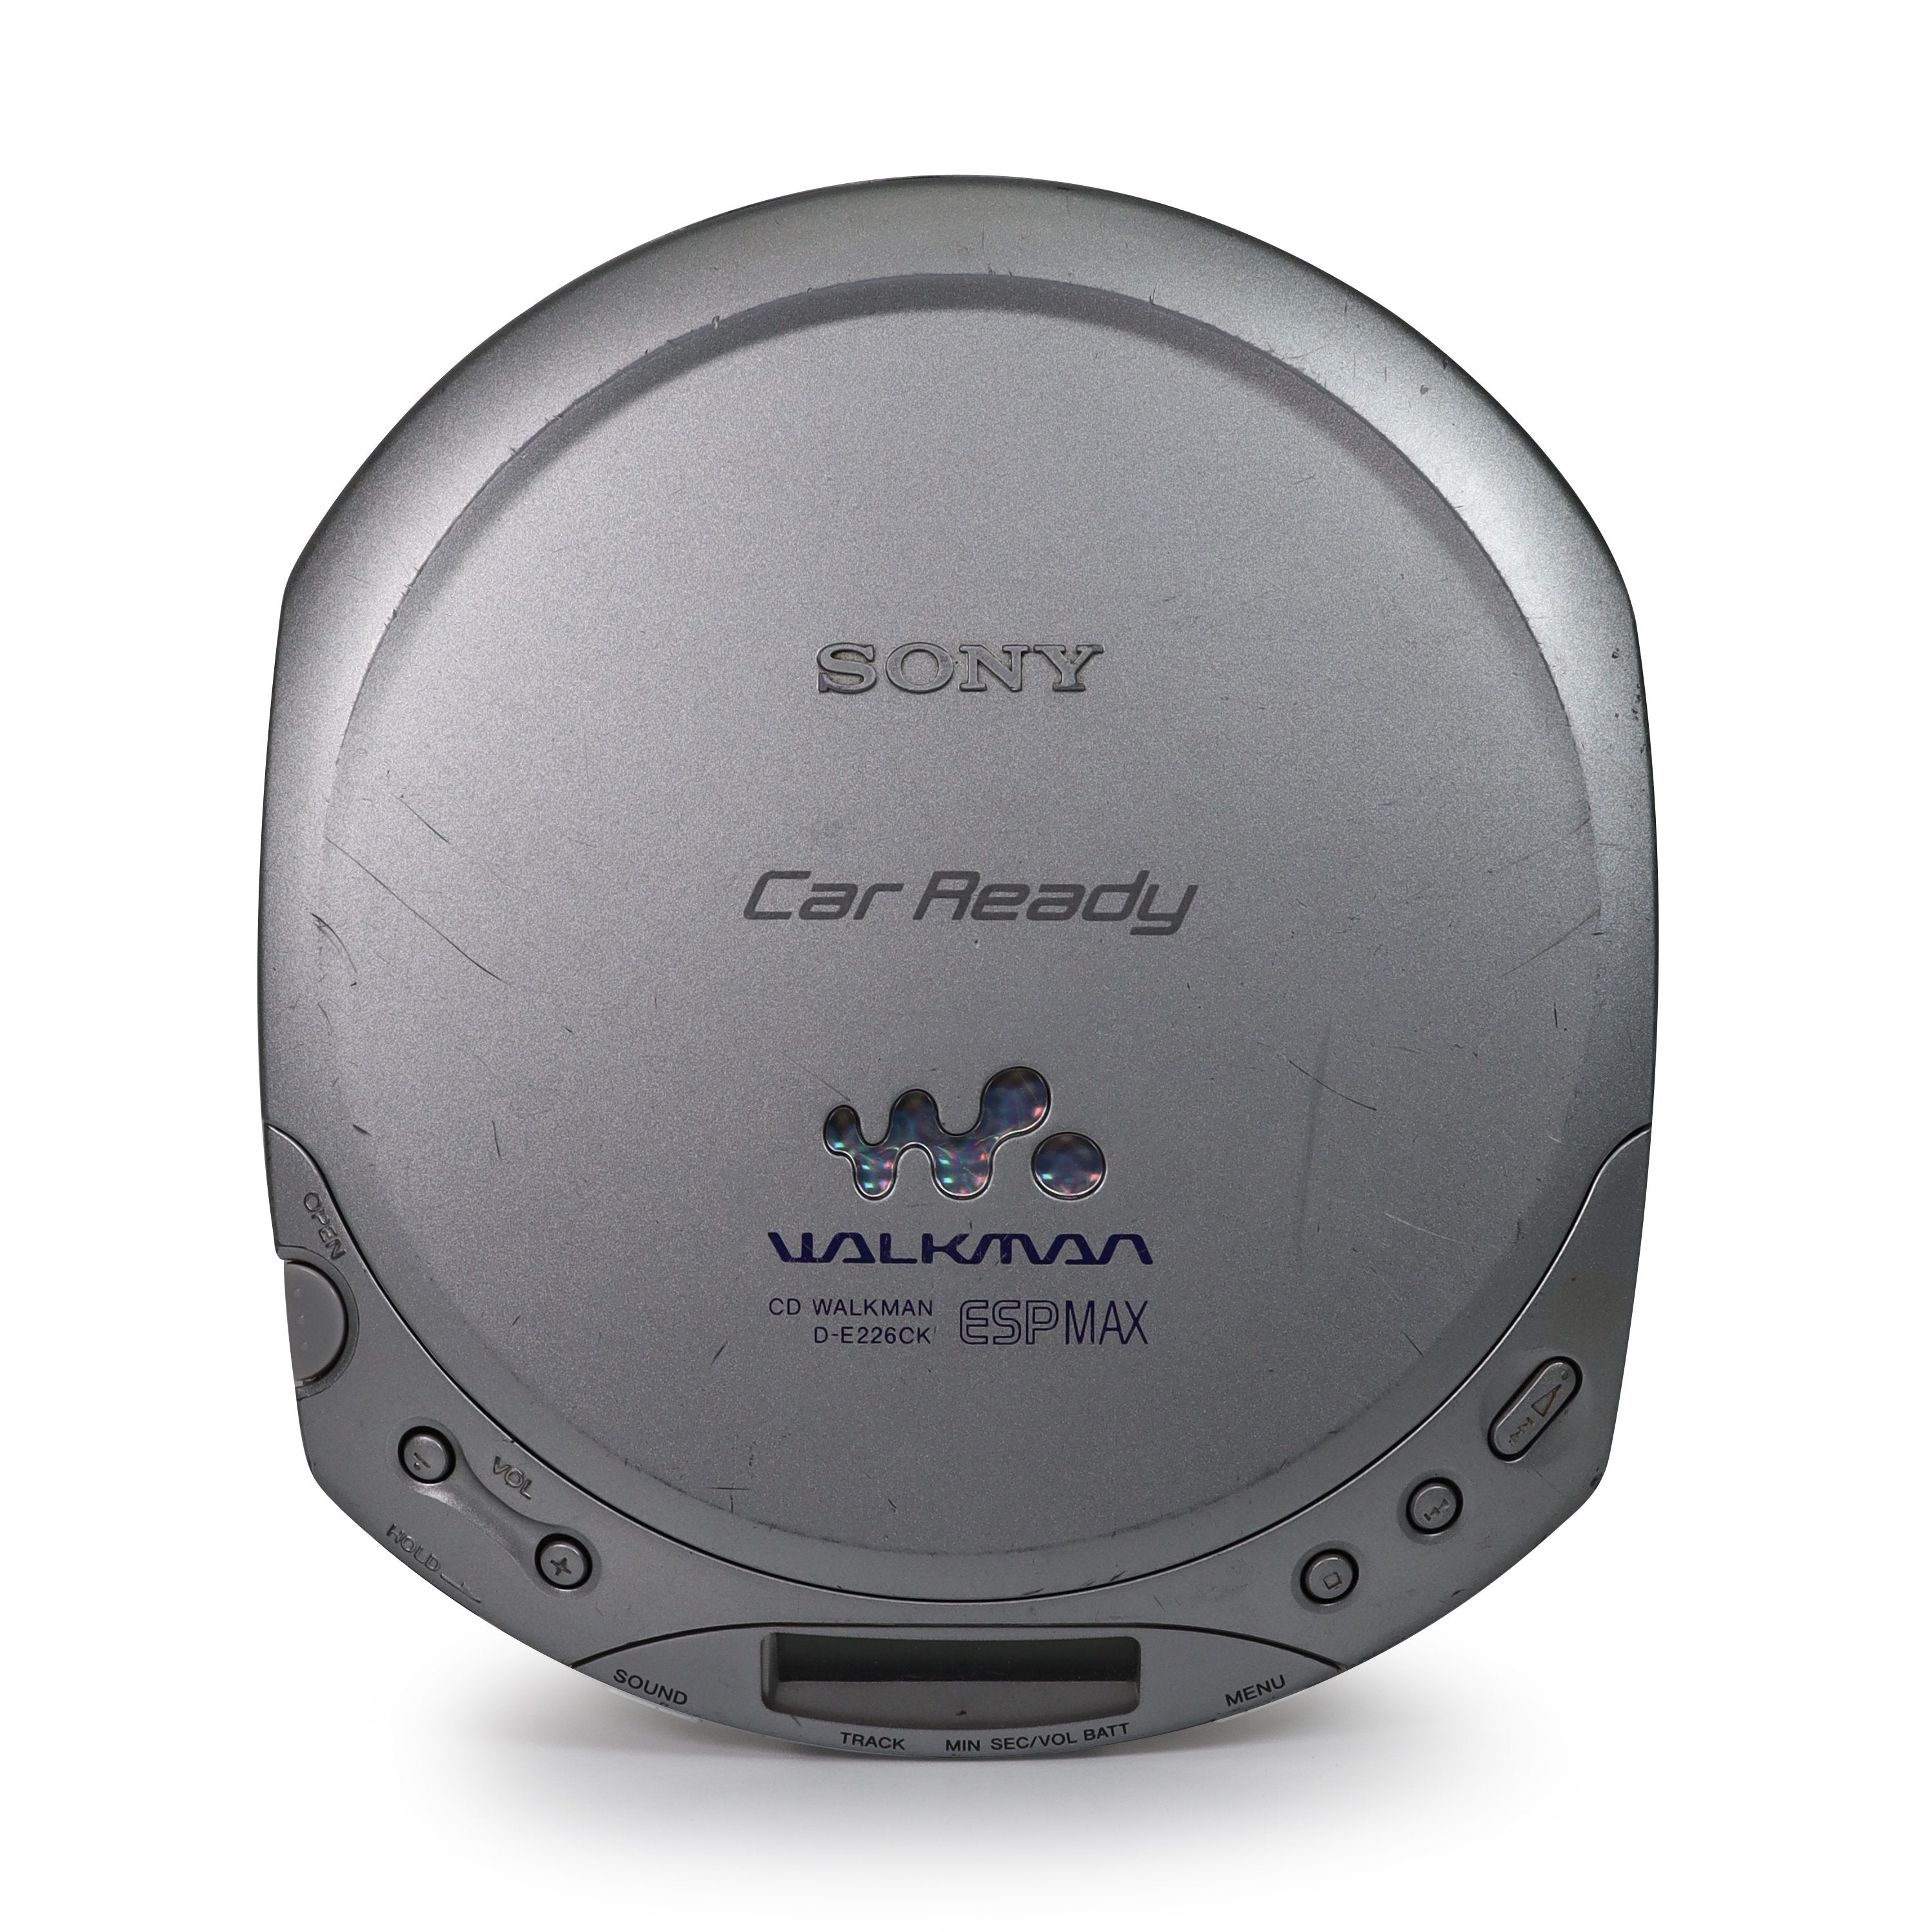  Portable CD Player with Rechargeable Battery - August